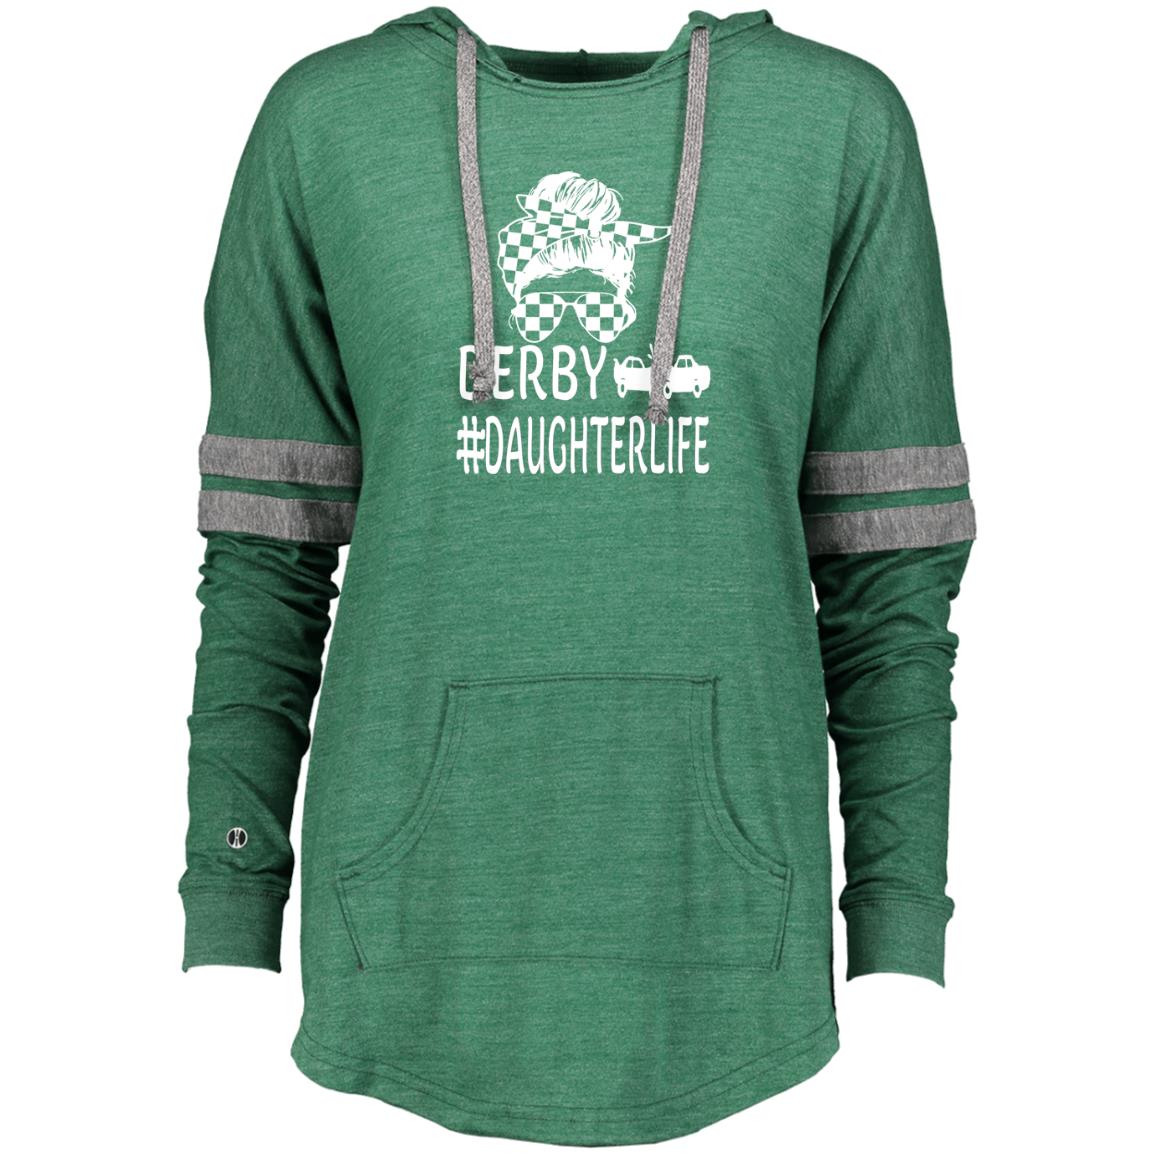 Derby Daughter Life Ladies Hooded Low Key Pullover